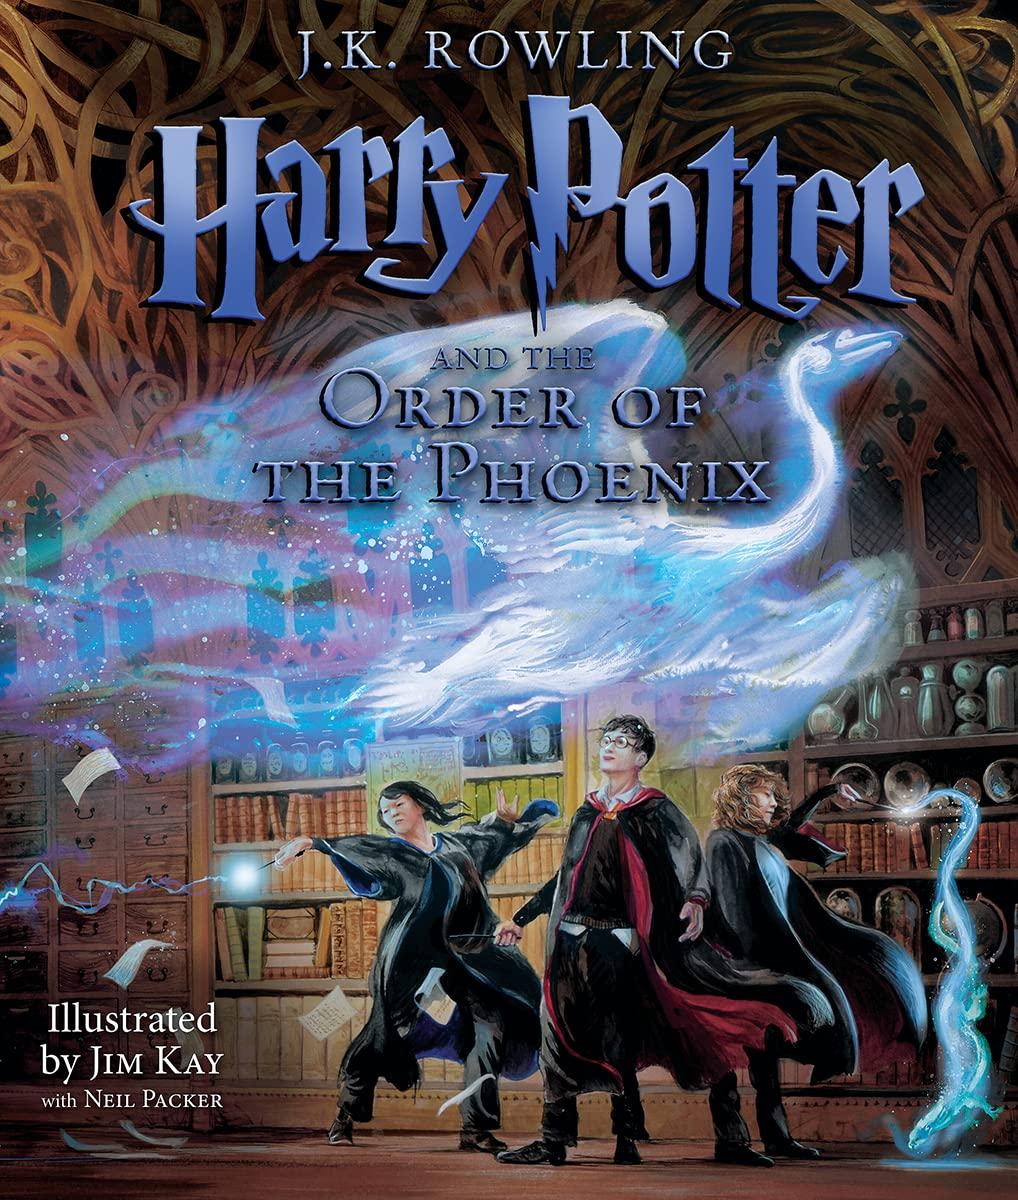 A Guide to the Characters of 'Harry Potter and the Order of the Phoenix' in Chronological Order